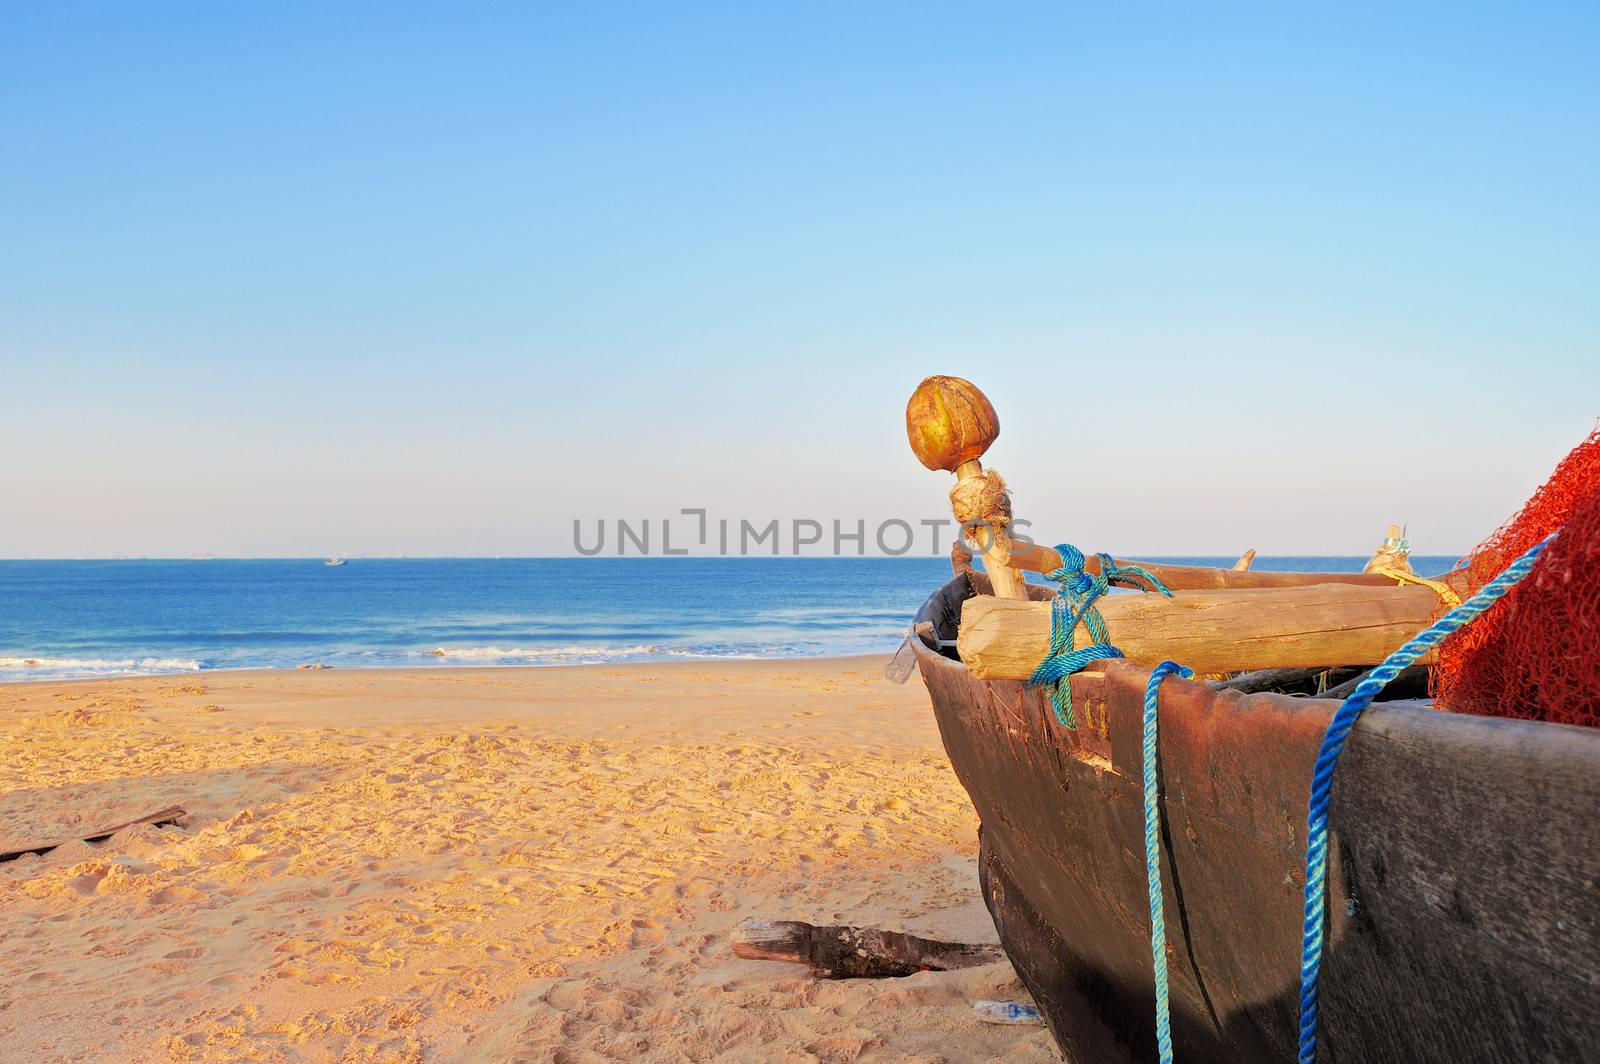 Old fishing boat on the beach of Goa, India